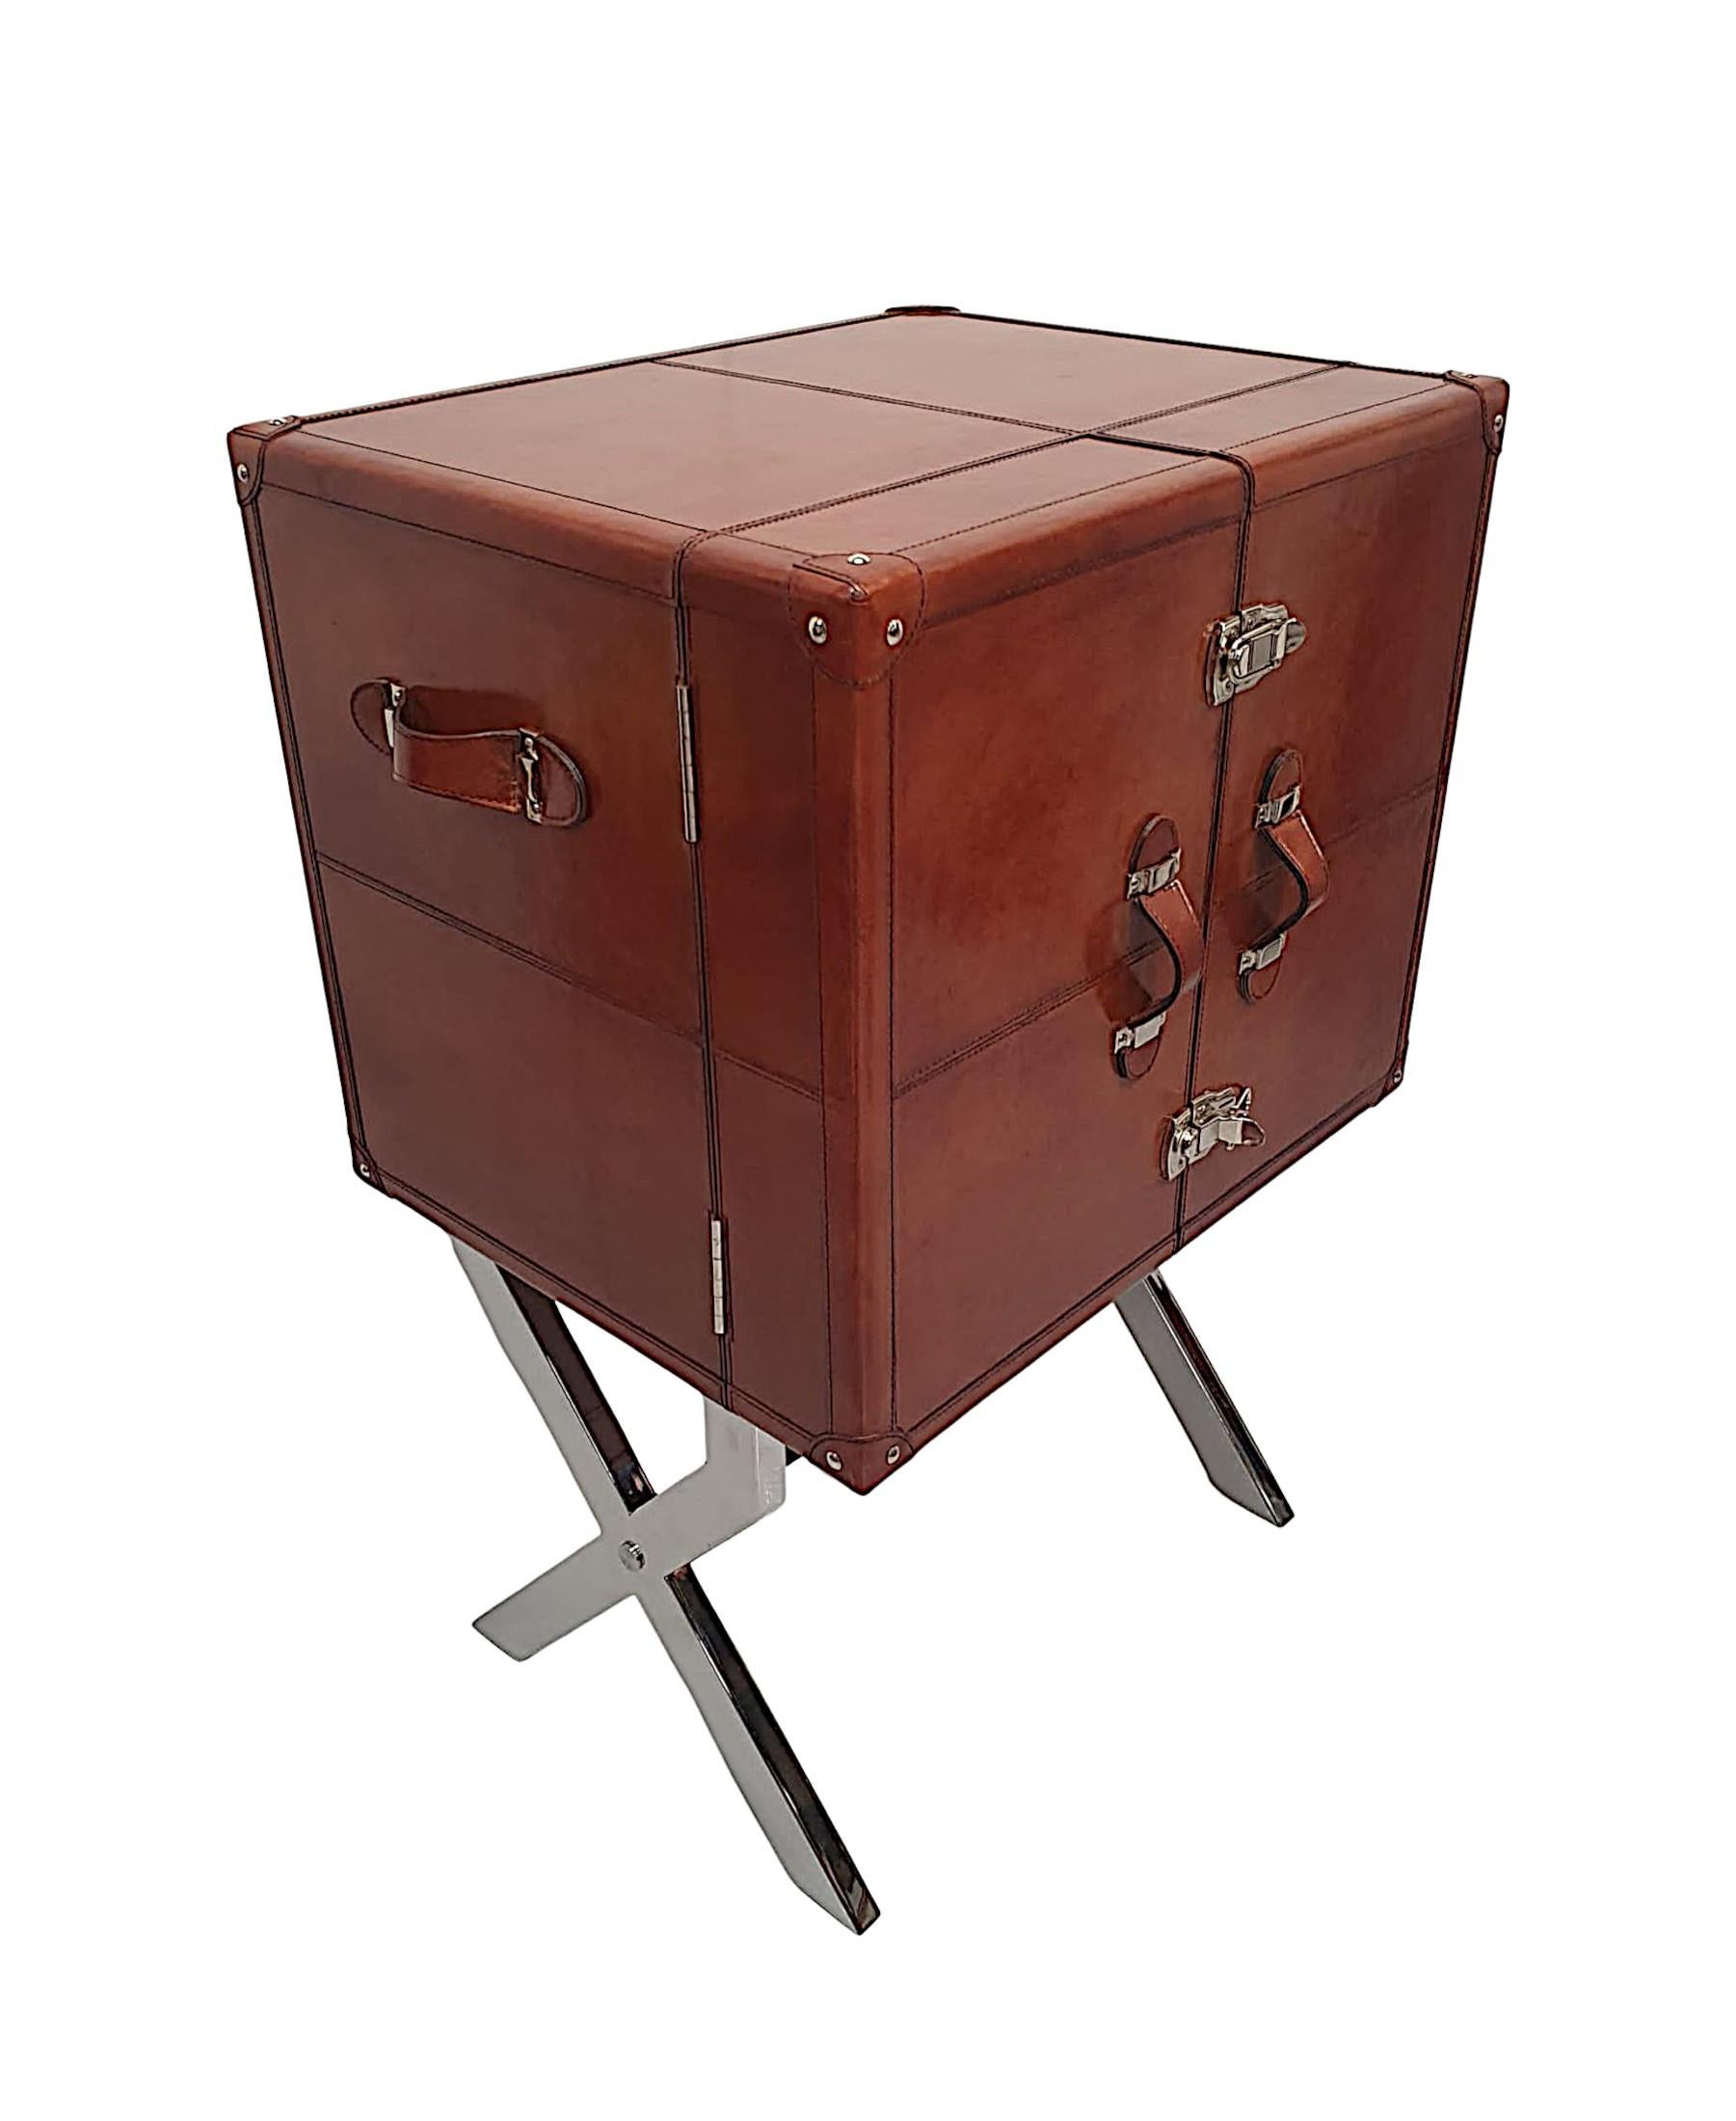 A fine leather and chrome drinks cabinet of exceptional quality and beautifully covered in elegant tan leather upholstery.  The moulded top is raised over two double doors fitted with leather strap pulls and chrome fasteners, opening to reveal a